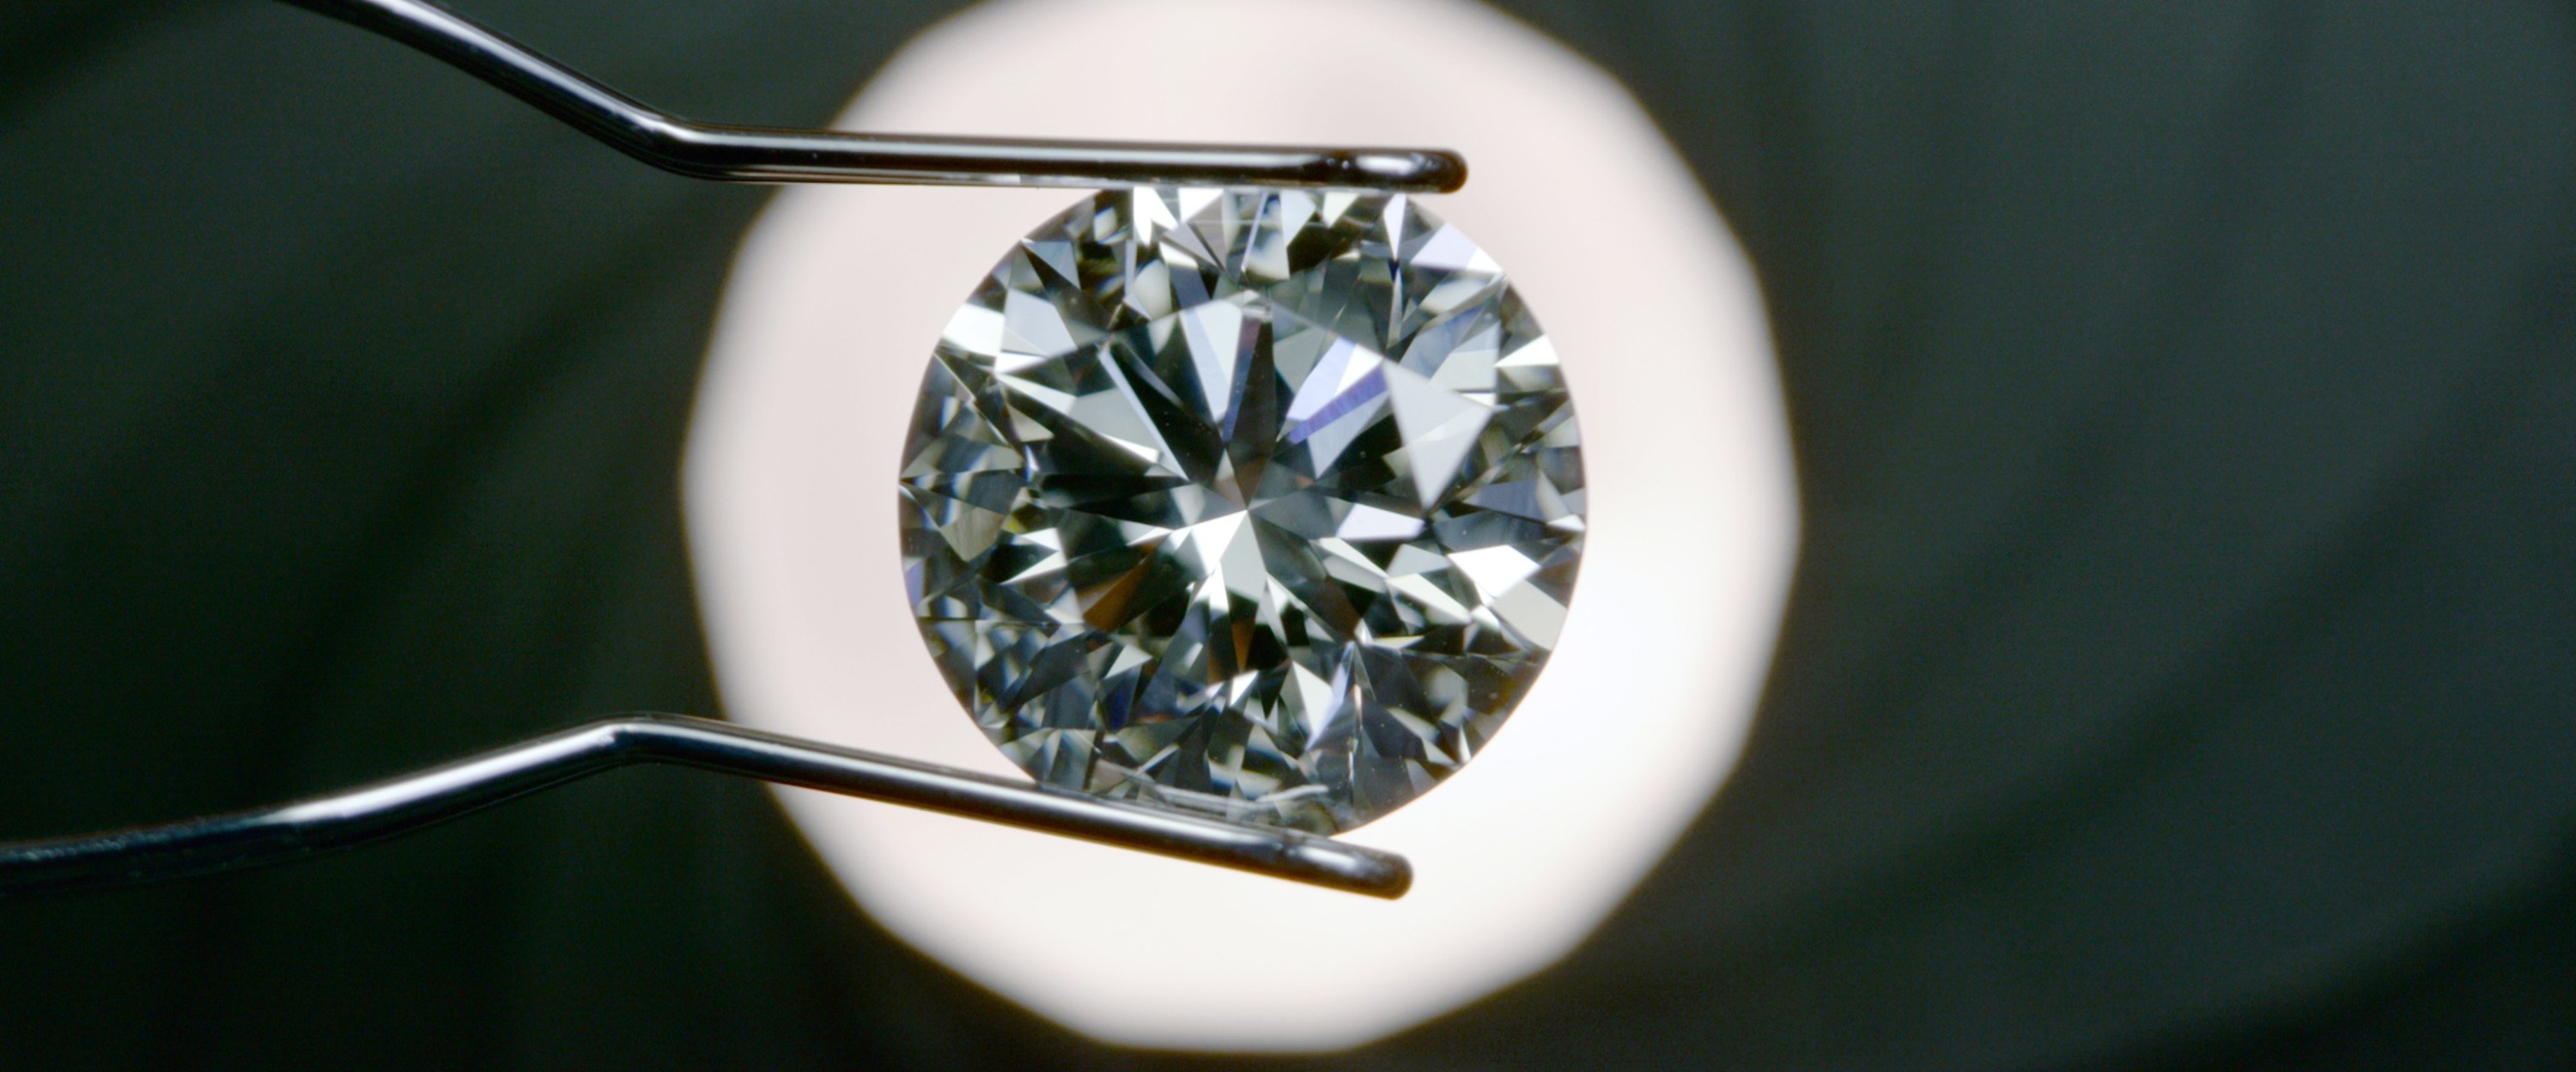 A close-up of a diamond being examined